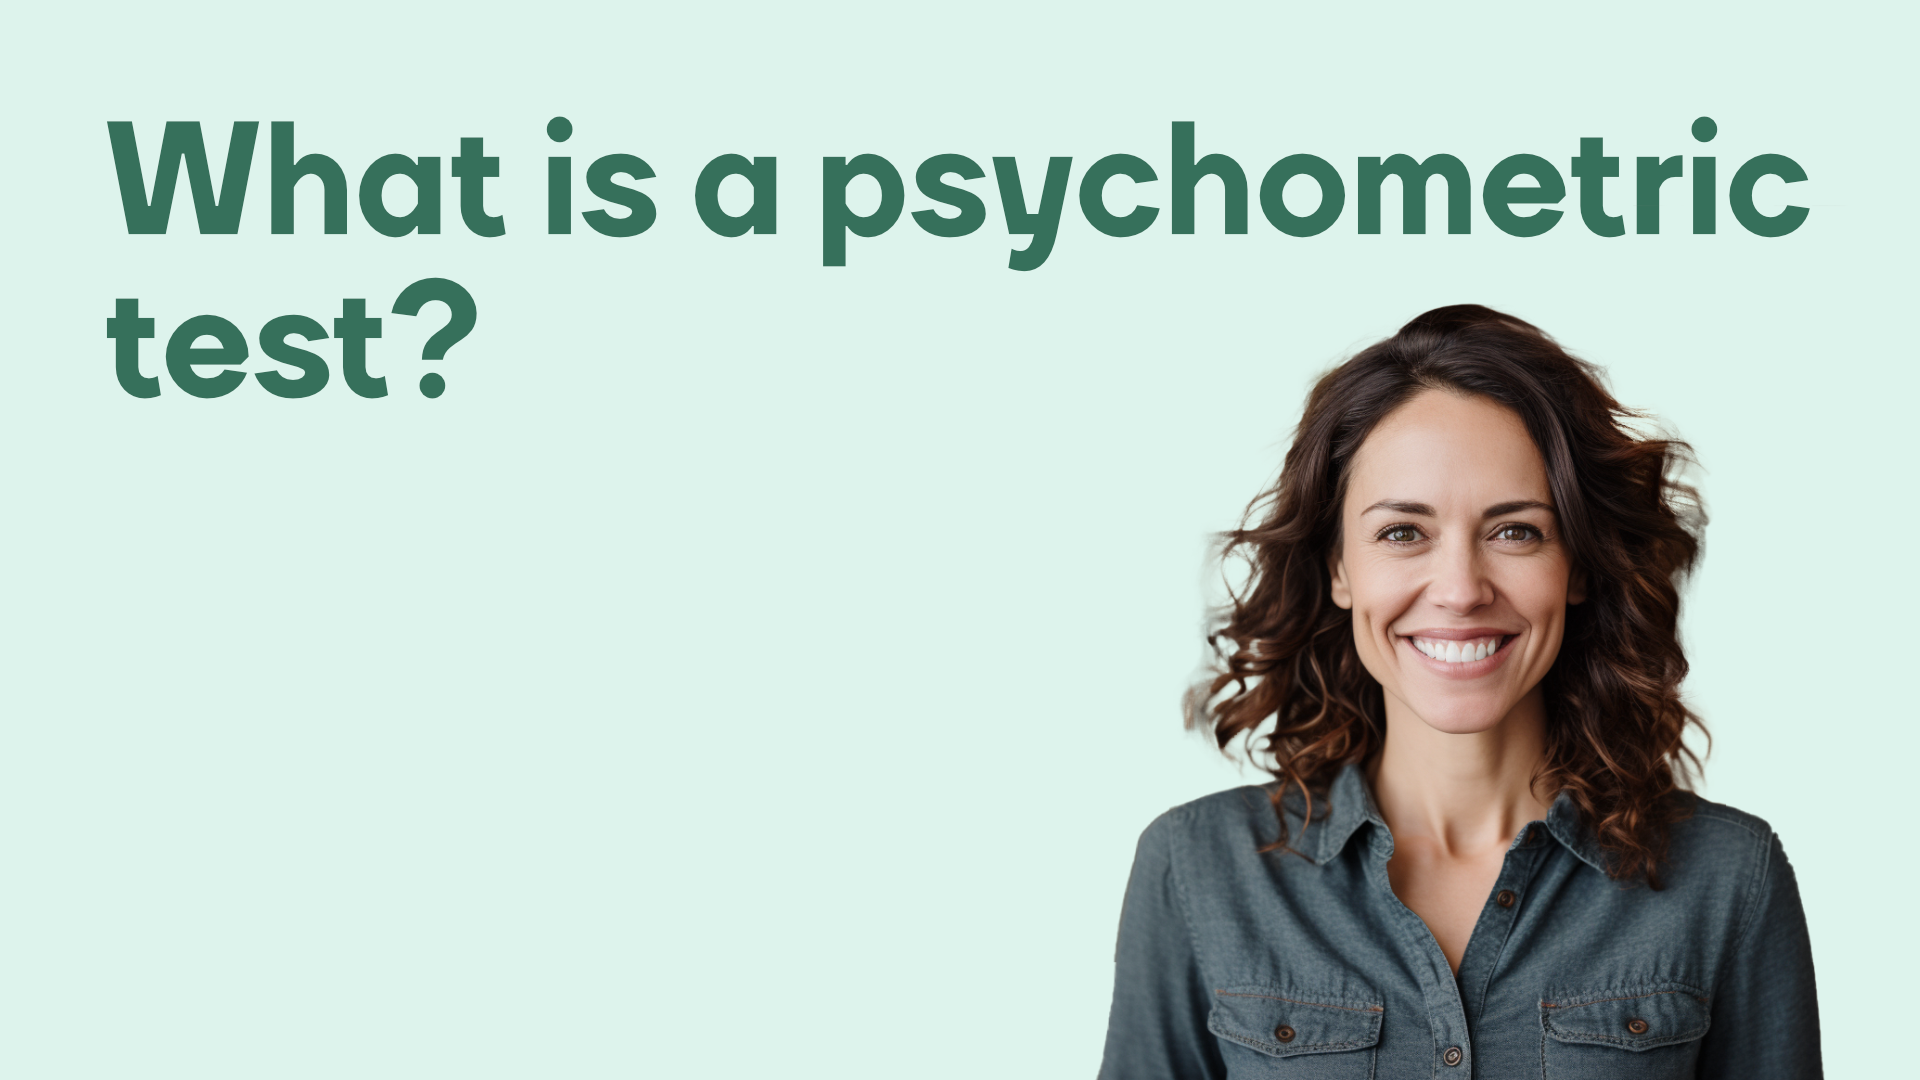 What is a psychometric test